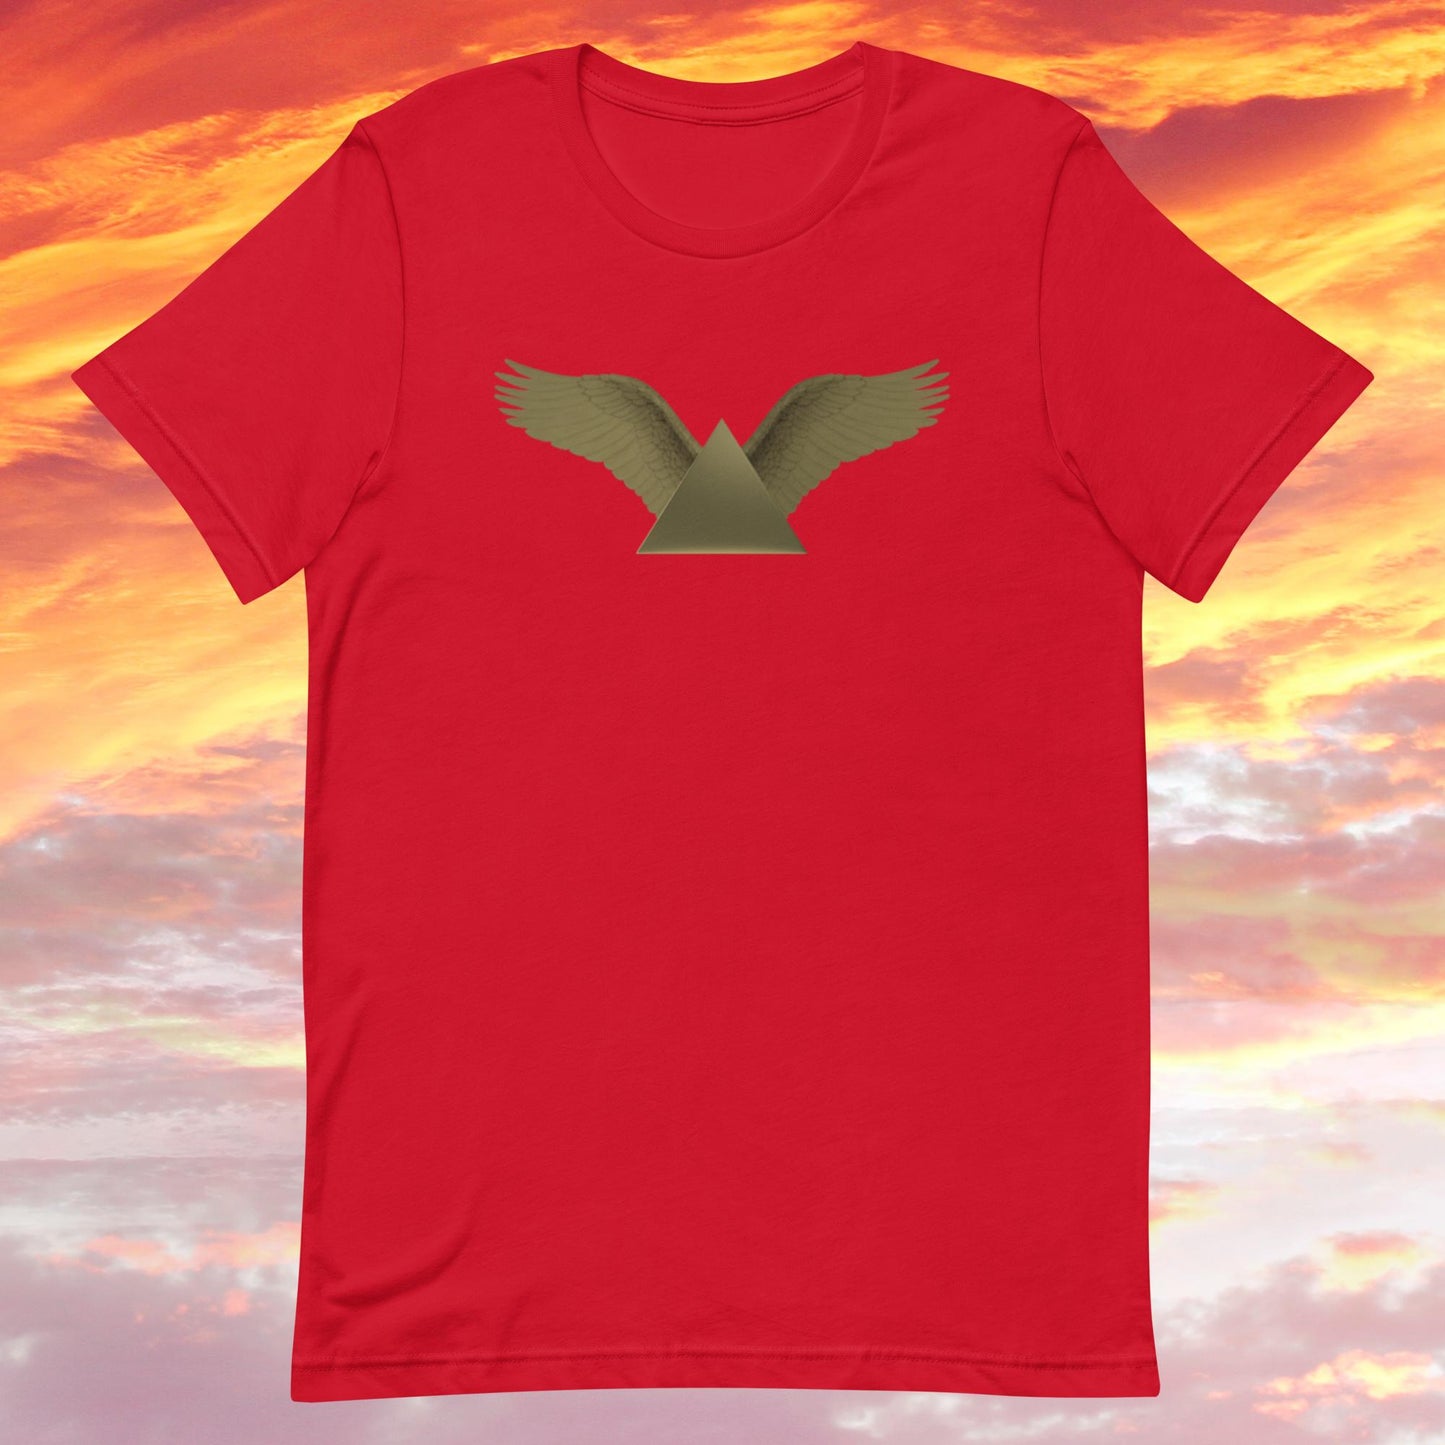 Triangle with Wings Graphic Tee